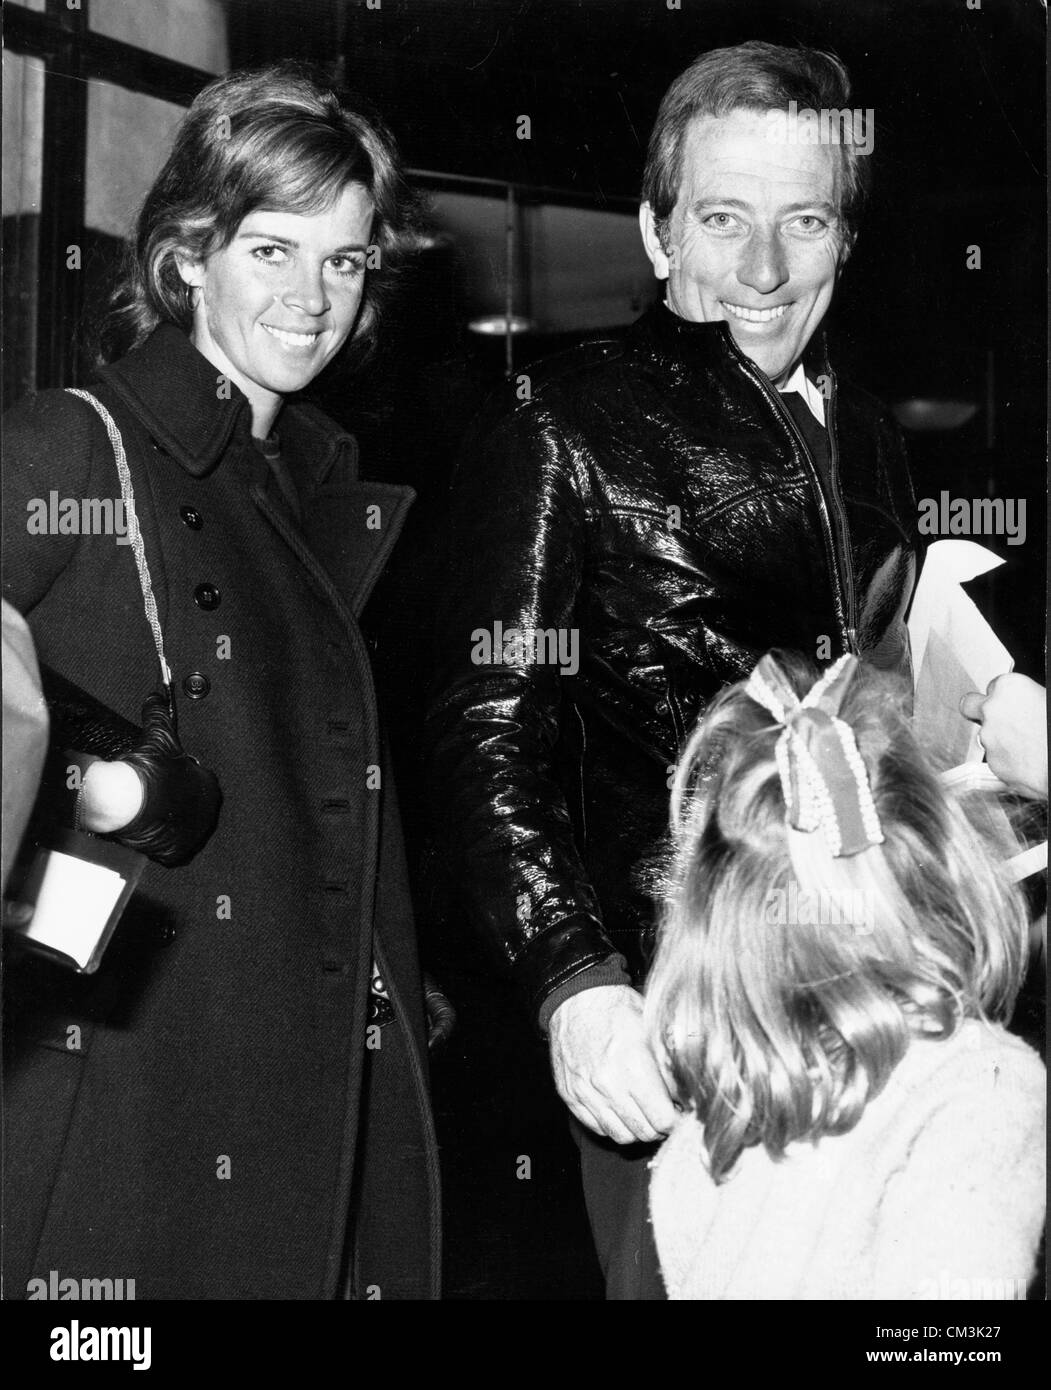 Nov. 8, 1970 - London, England, U.K. - Singer ANDY WILLIAMS and his estranged wife CLAUDINE LONGET arrived in London together for Williams to perform in the Royal Variety Performance at the London Palladium. PICTURED: Andy Williams and Claudine Longet stop to chat with little girl upon arriving at the Savoy Hotel. (Credit Image: © KEYSTONE Pictures USA/ZUMAPRESS.com) Stock Photo